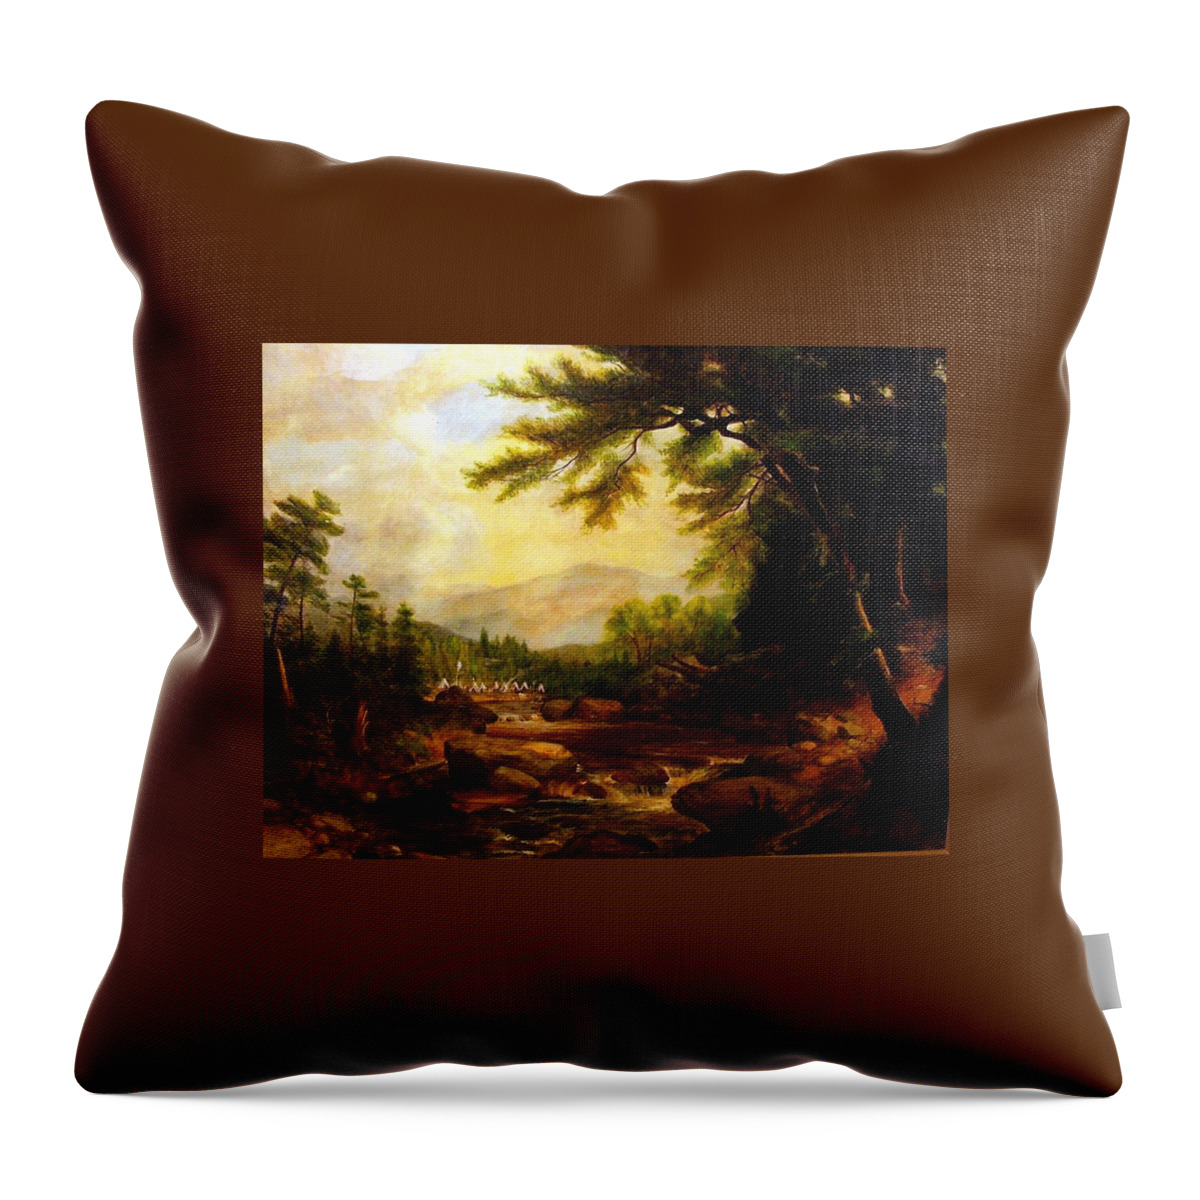 Encampment Throw Pillow featuring the painting Encampment by Perry's Fine Art